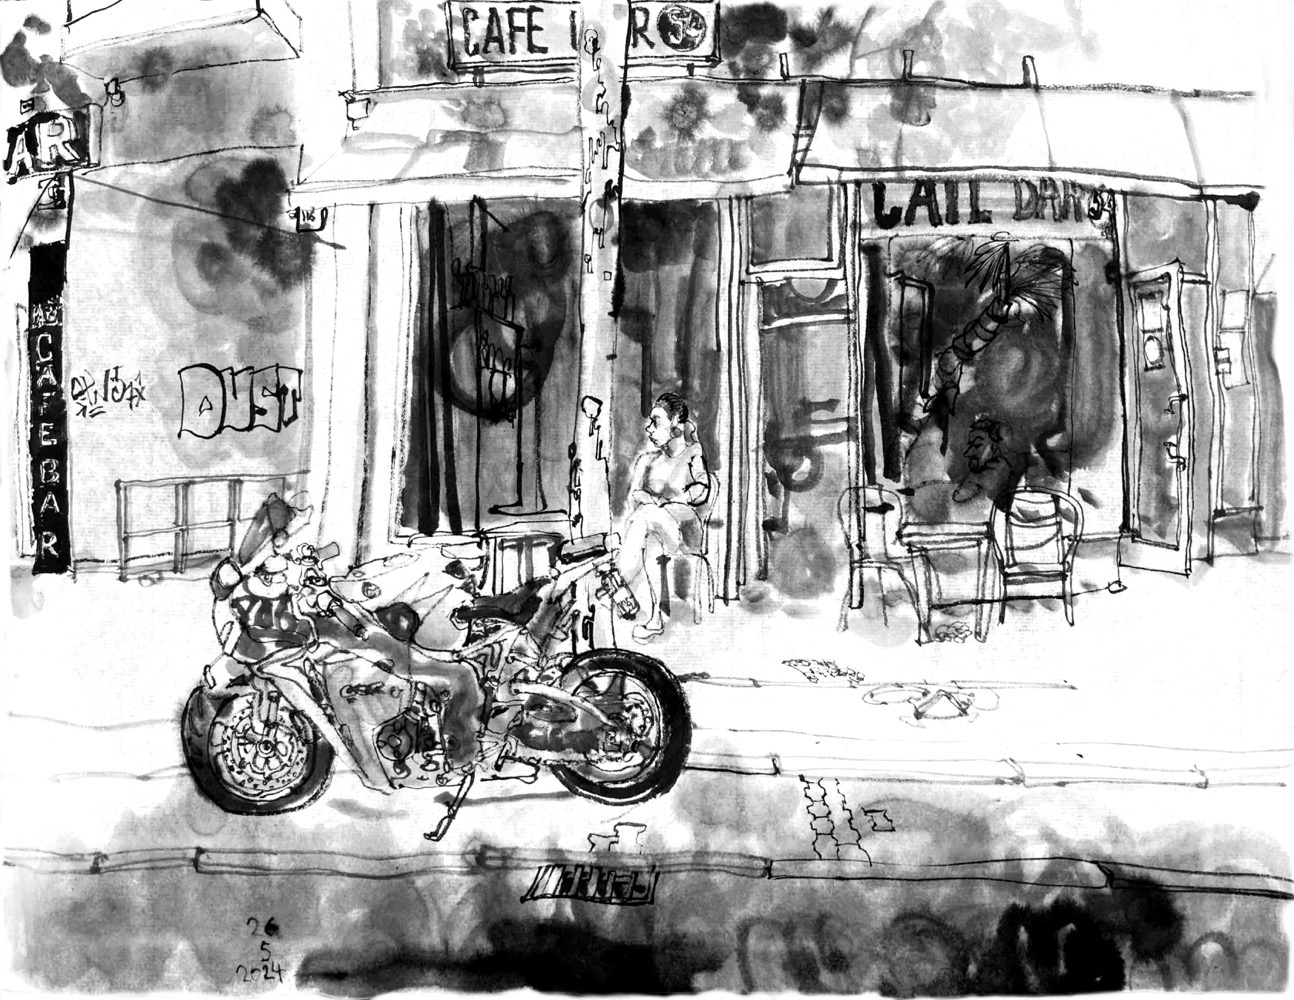 Ink drawing of a café at a street. The café has signs with ‘café bar 54’ on it, in front a woman sits on a chhair, a tree and a motorcycle in front of that, standing at a roadside. Left of the café is a gateway an the sign of another café, saying ‘park café bar’.